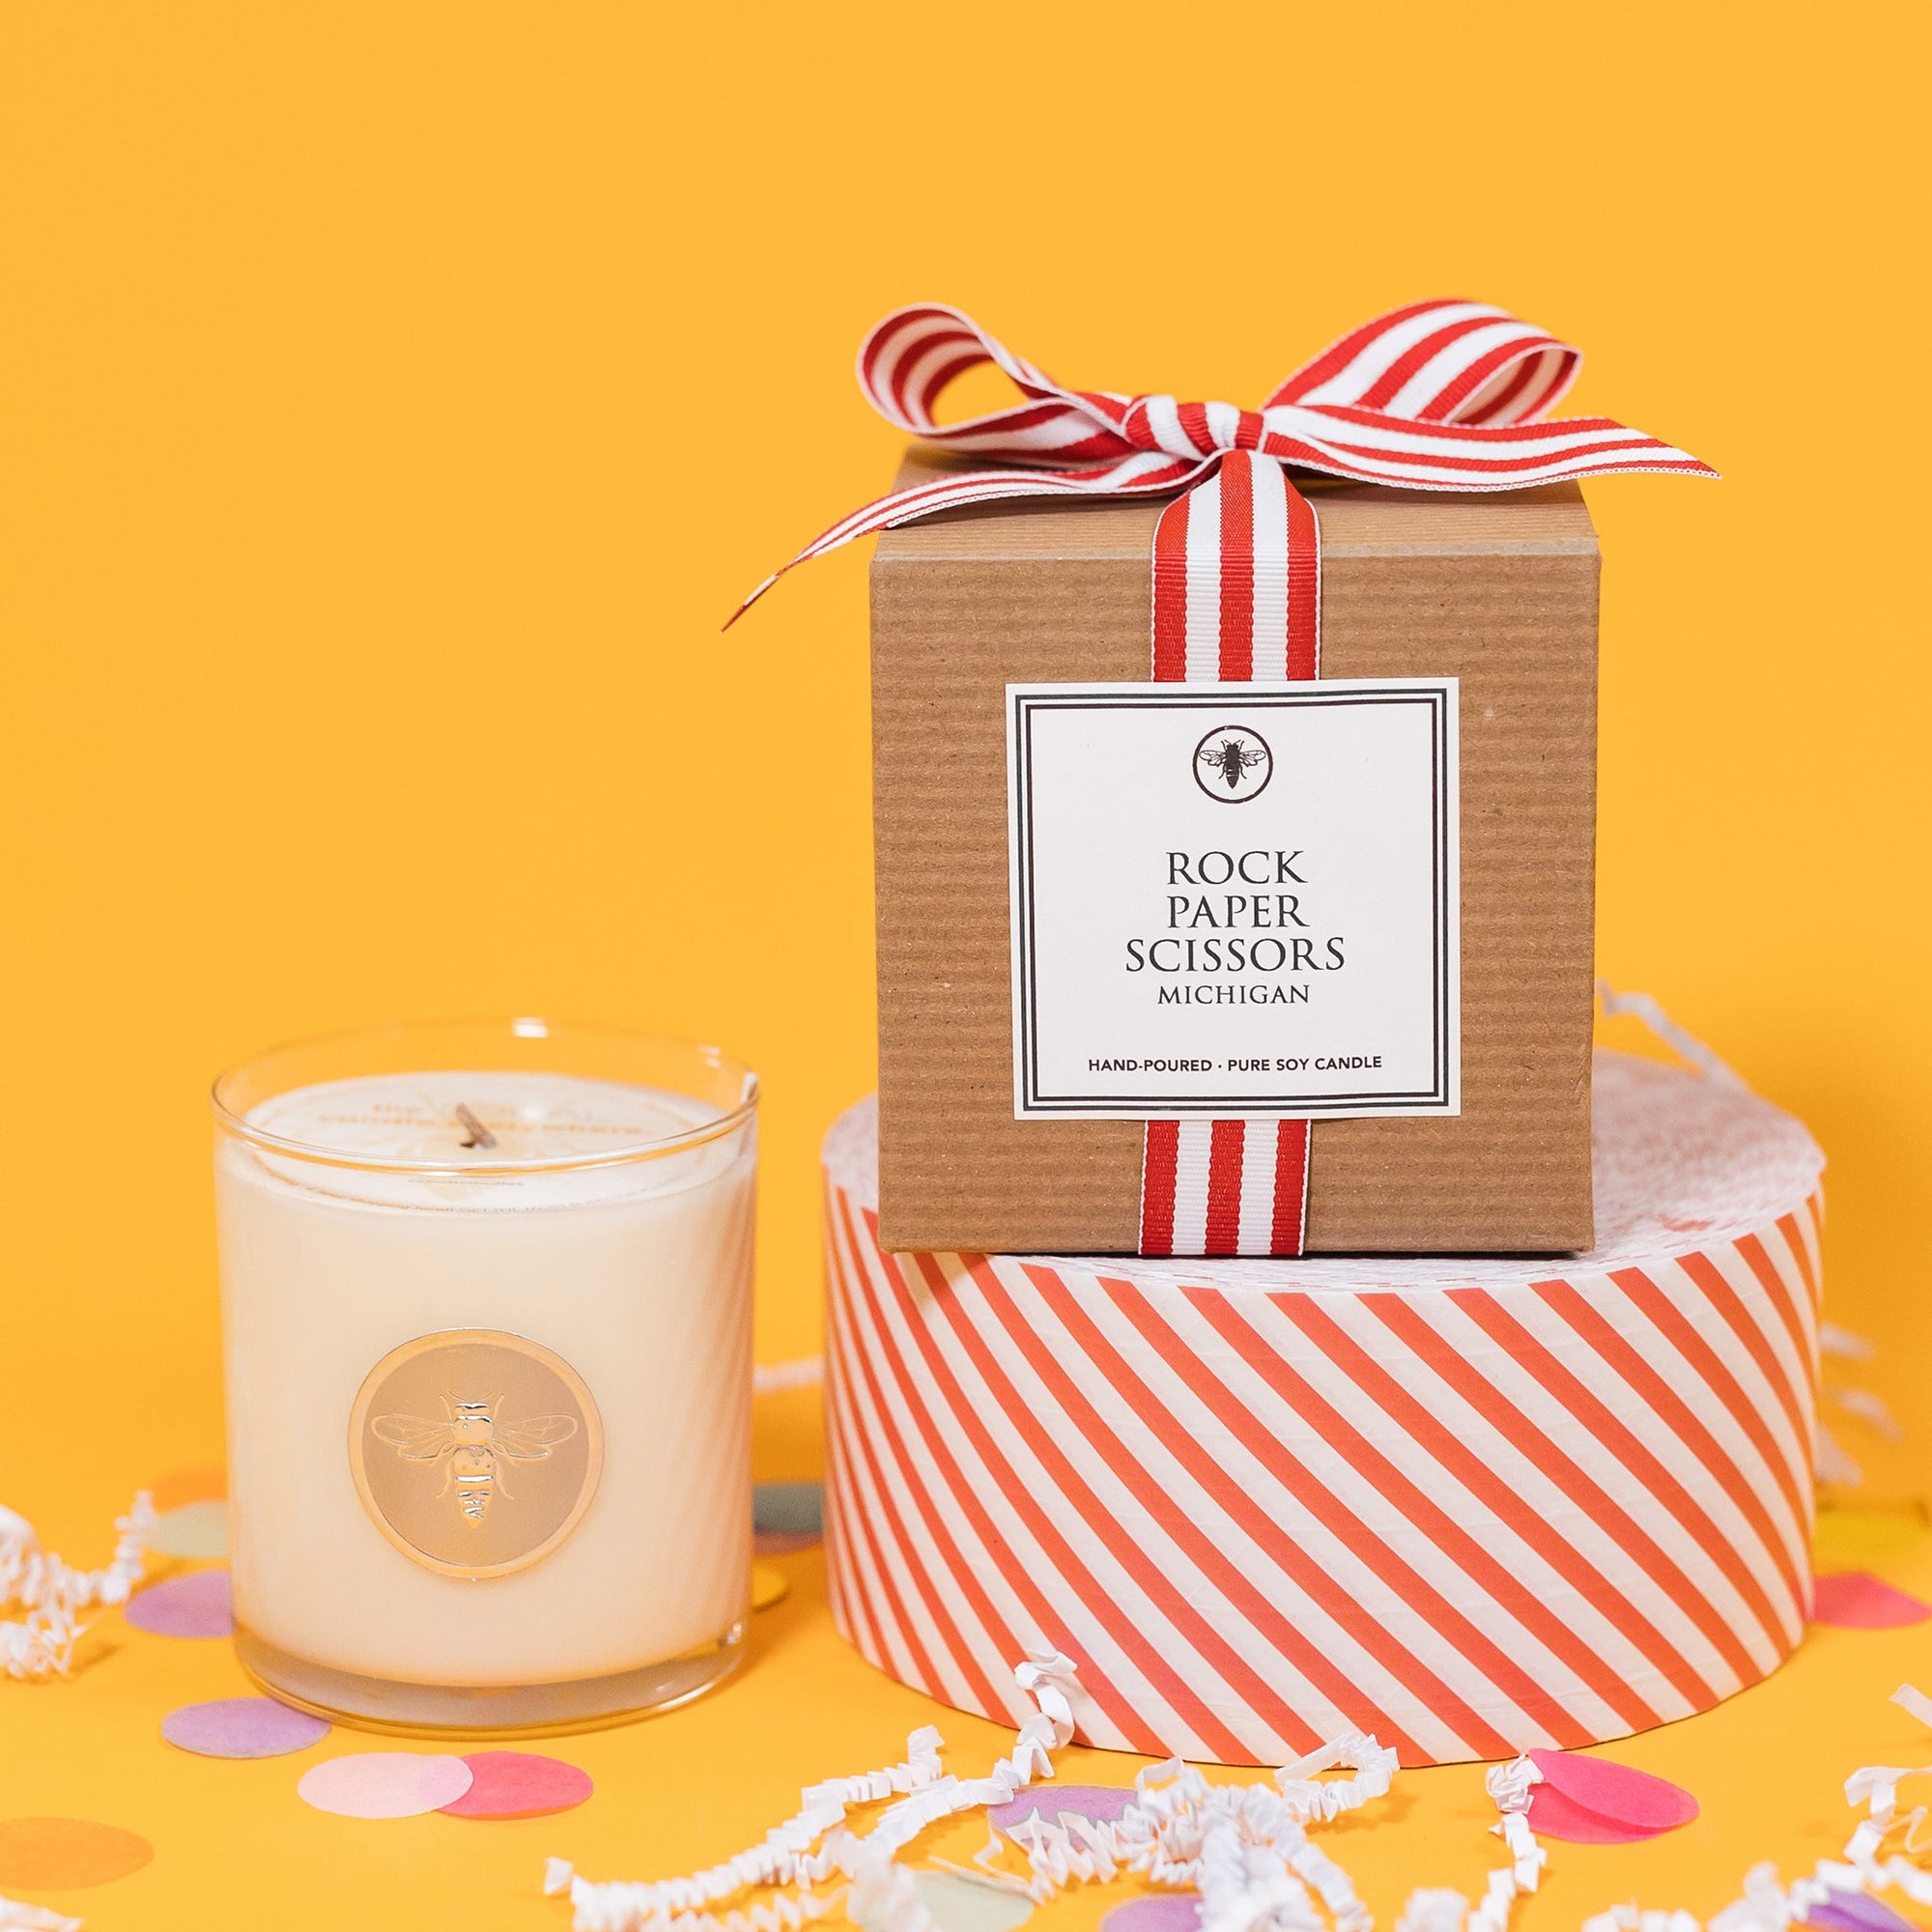 On a sunny mustard background is a candle with a box and white crinkle with big, colorful confetti scattered around. The clear glass candle has a gold foil round label with an illustration of a bee on it. There is a kraft box with red and white striped ribbon tied at the top and on the front is a square white label that says "Rock Paper Scissors Michigan" and it sits atop a red and white striped packing tape. The candle is a "Hand-poured, pure soy candle."